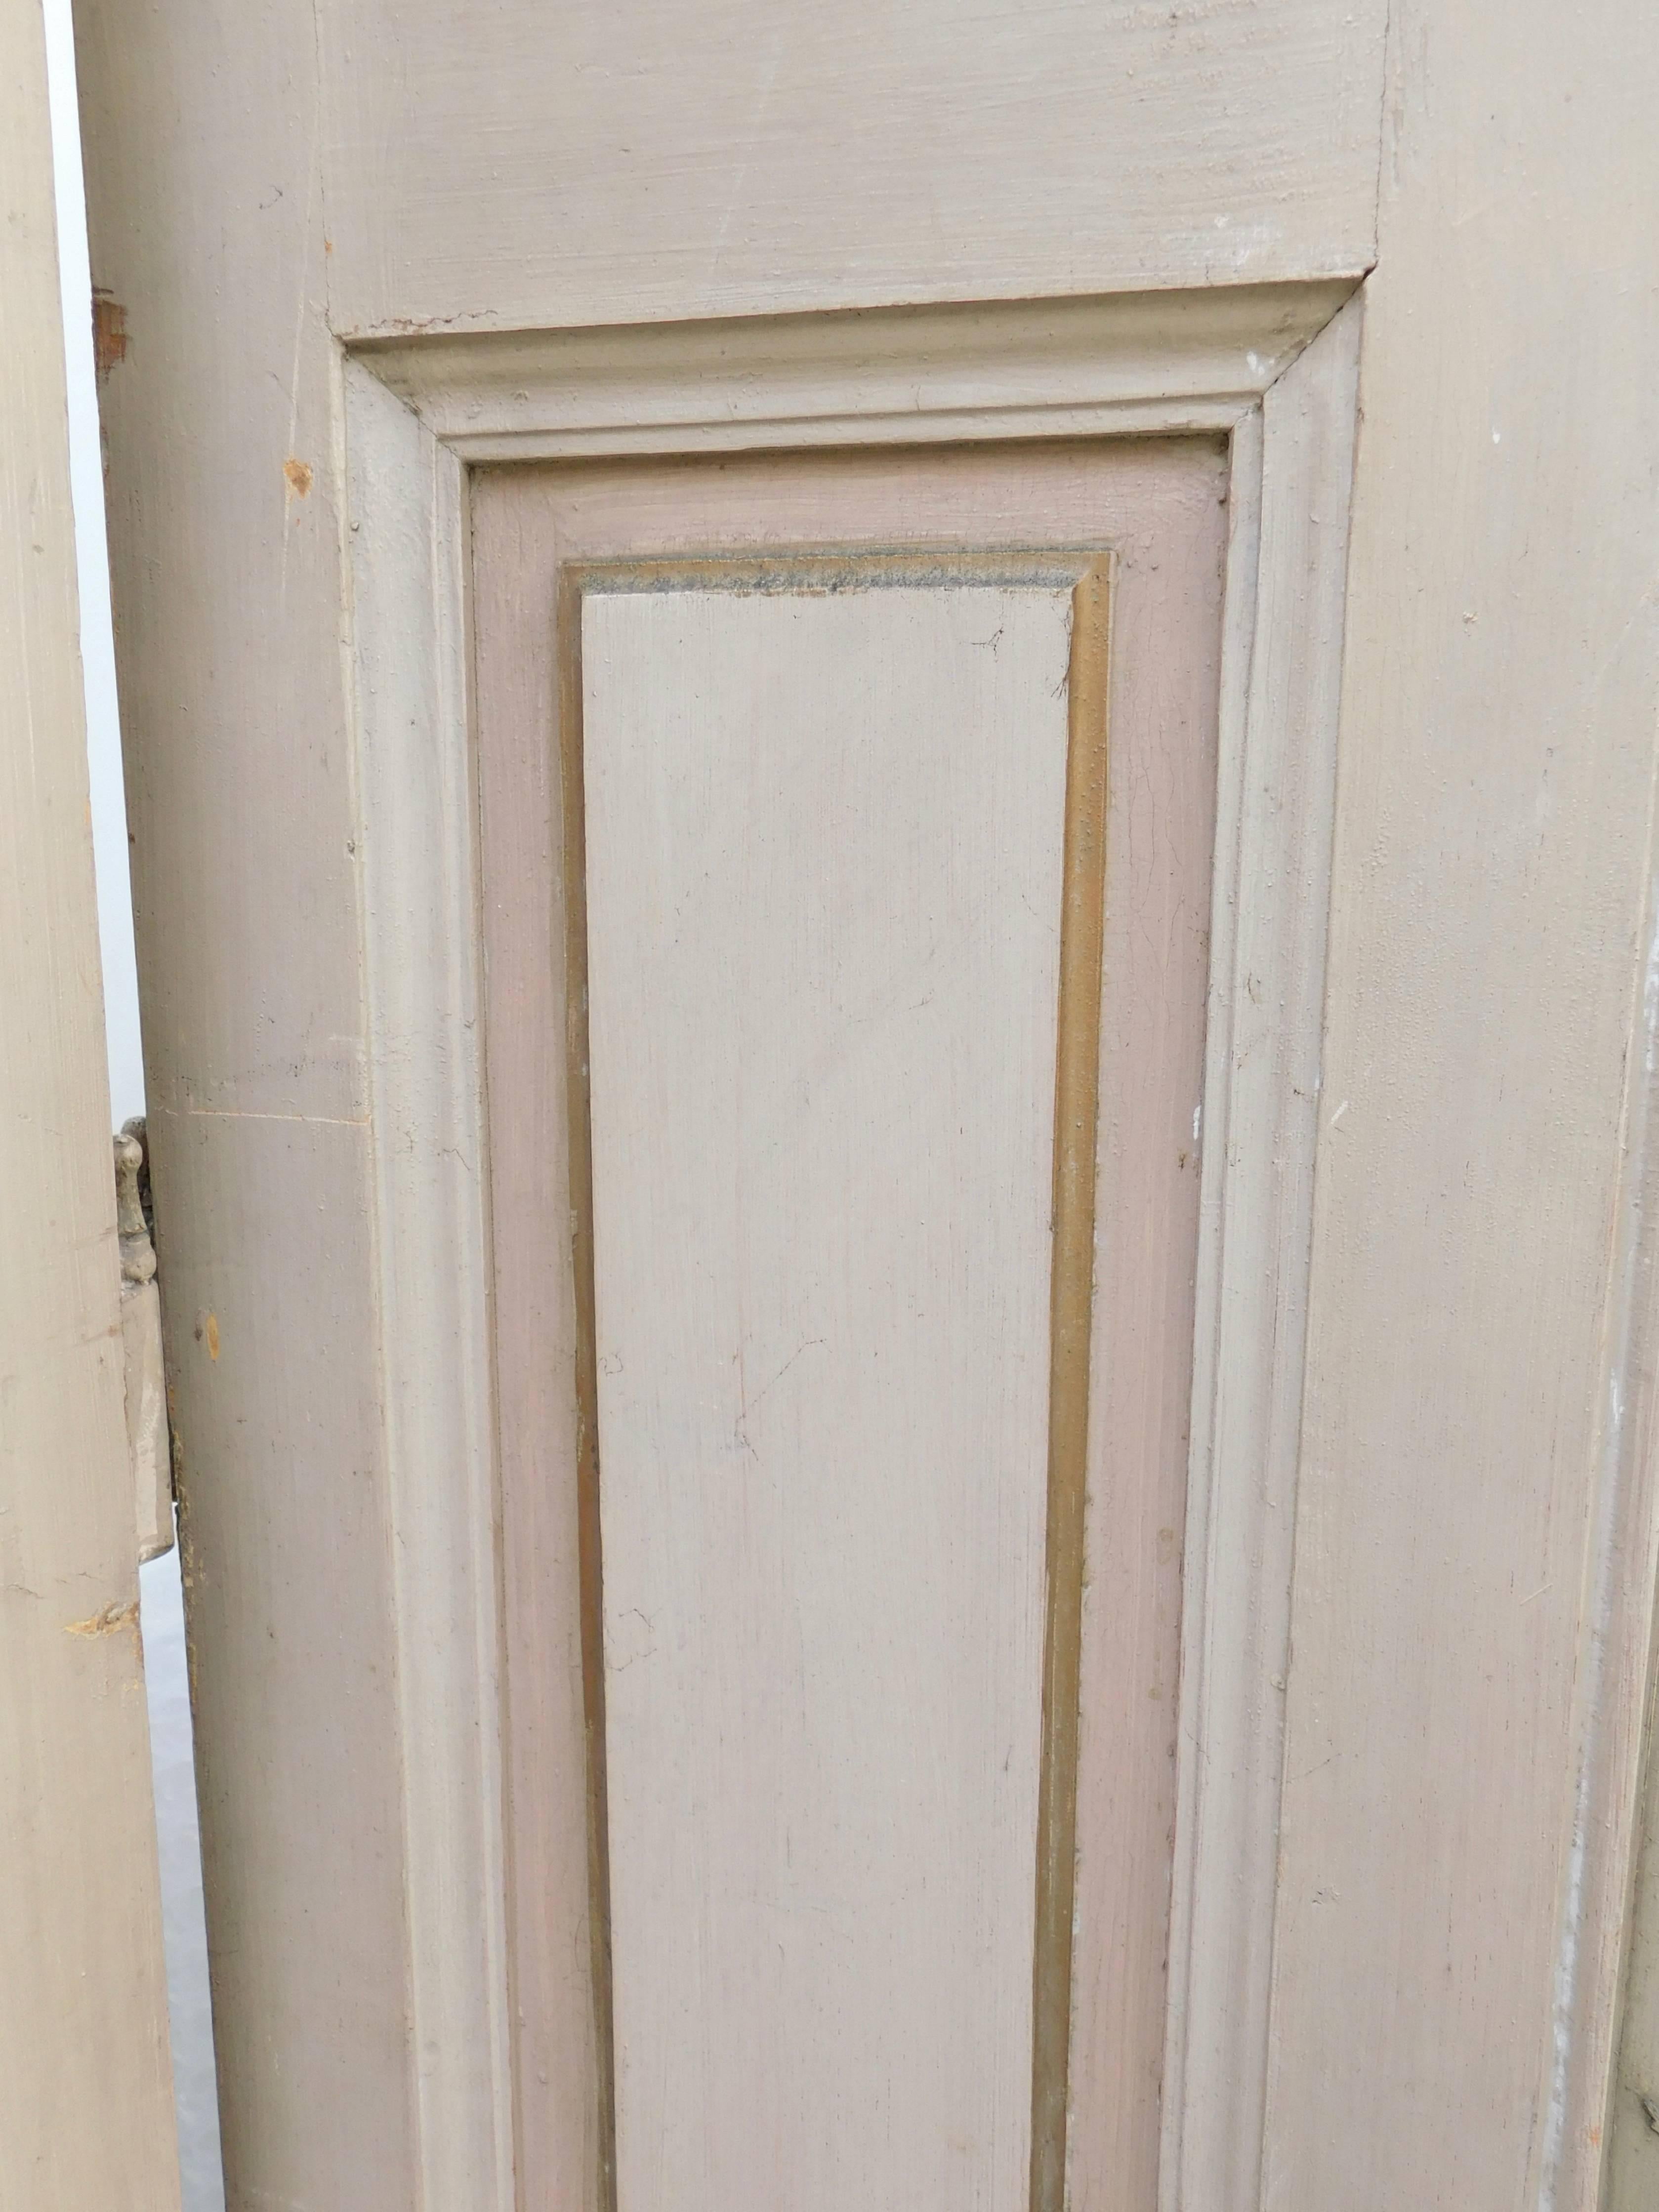 Early 19th century French door shutters retaining the original soft beige, light salmon and gold paint. We have two sets of eight shutters each, for a total of 16 matching shutters (eight pair).Each pair are hinged together, and of course you could